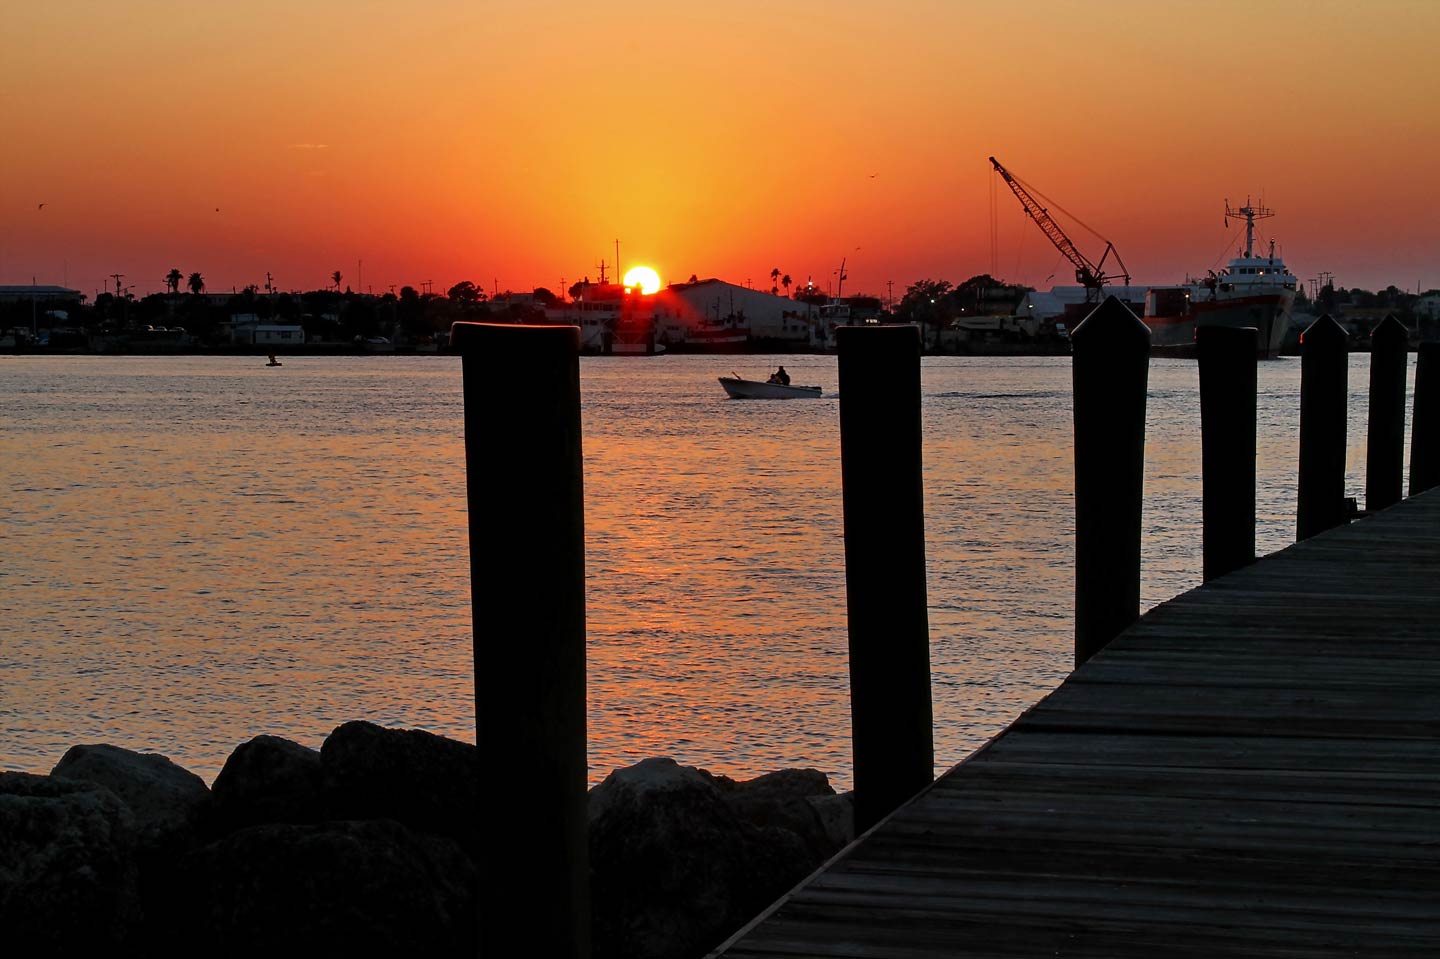 One of Fort Pierce's fishing piers at sunset, with the Atlantic Ocean in the distance